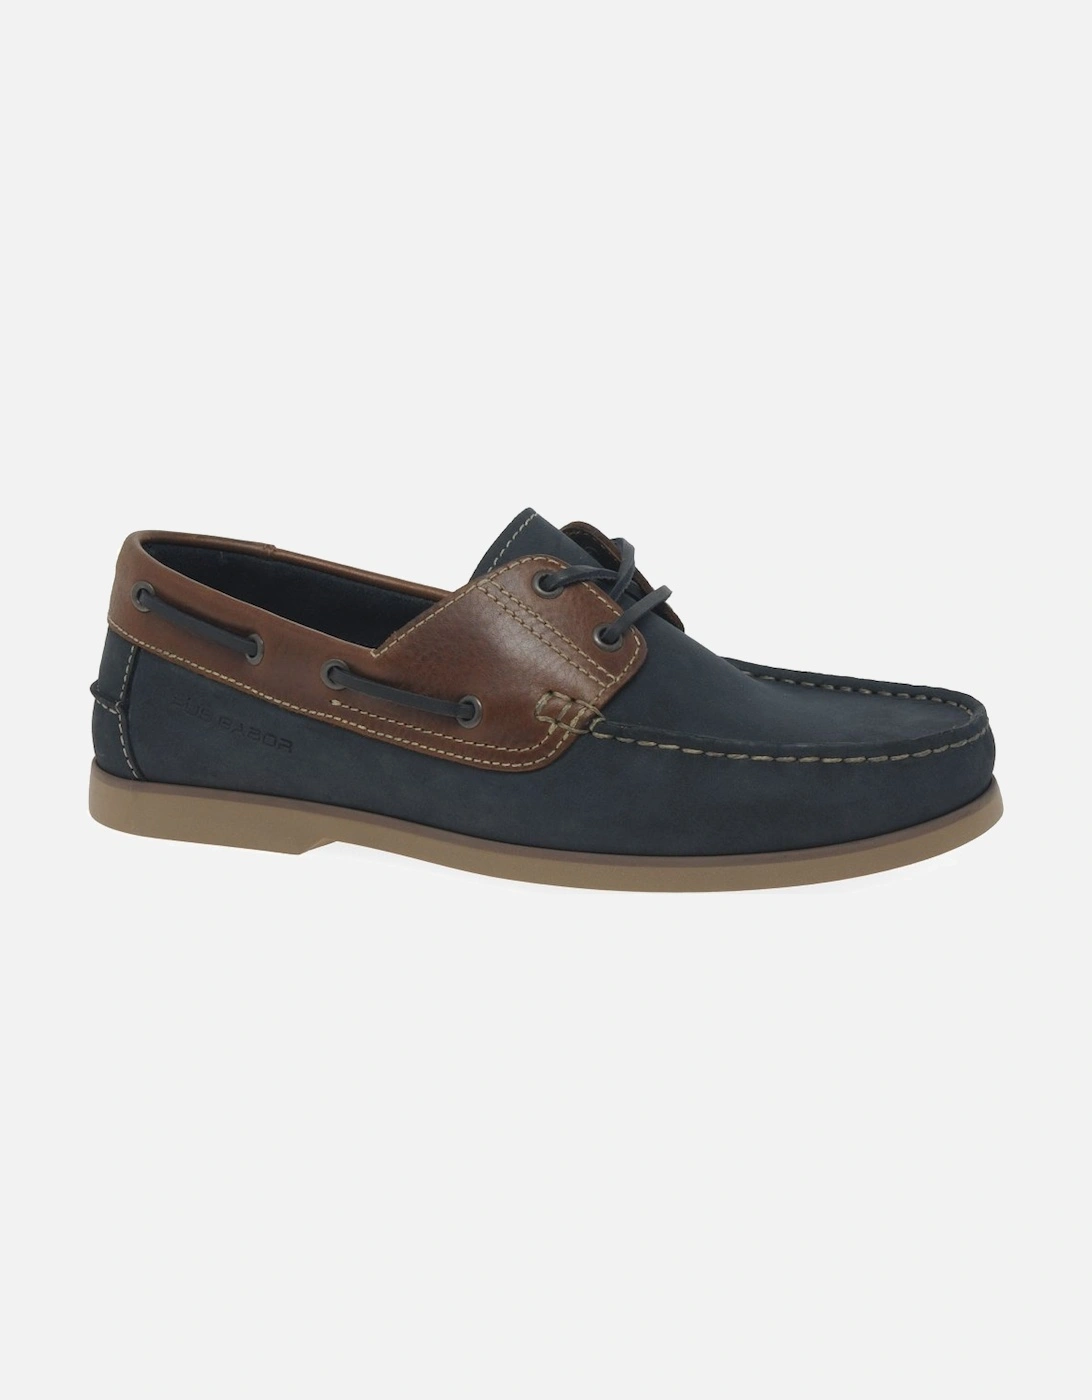 Bay Mens Boat Shoes, 9 of 8